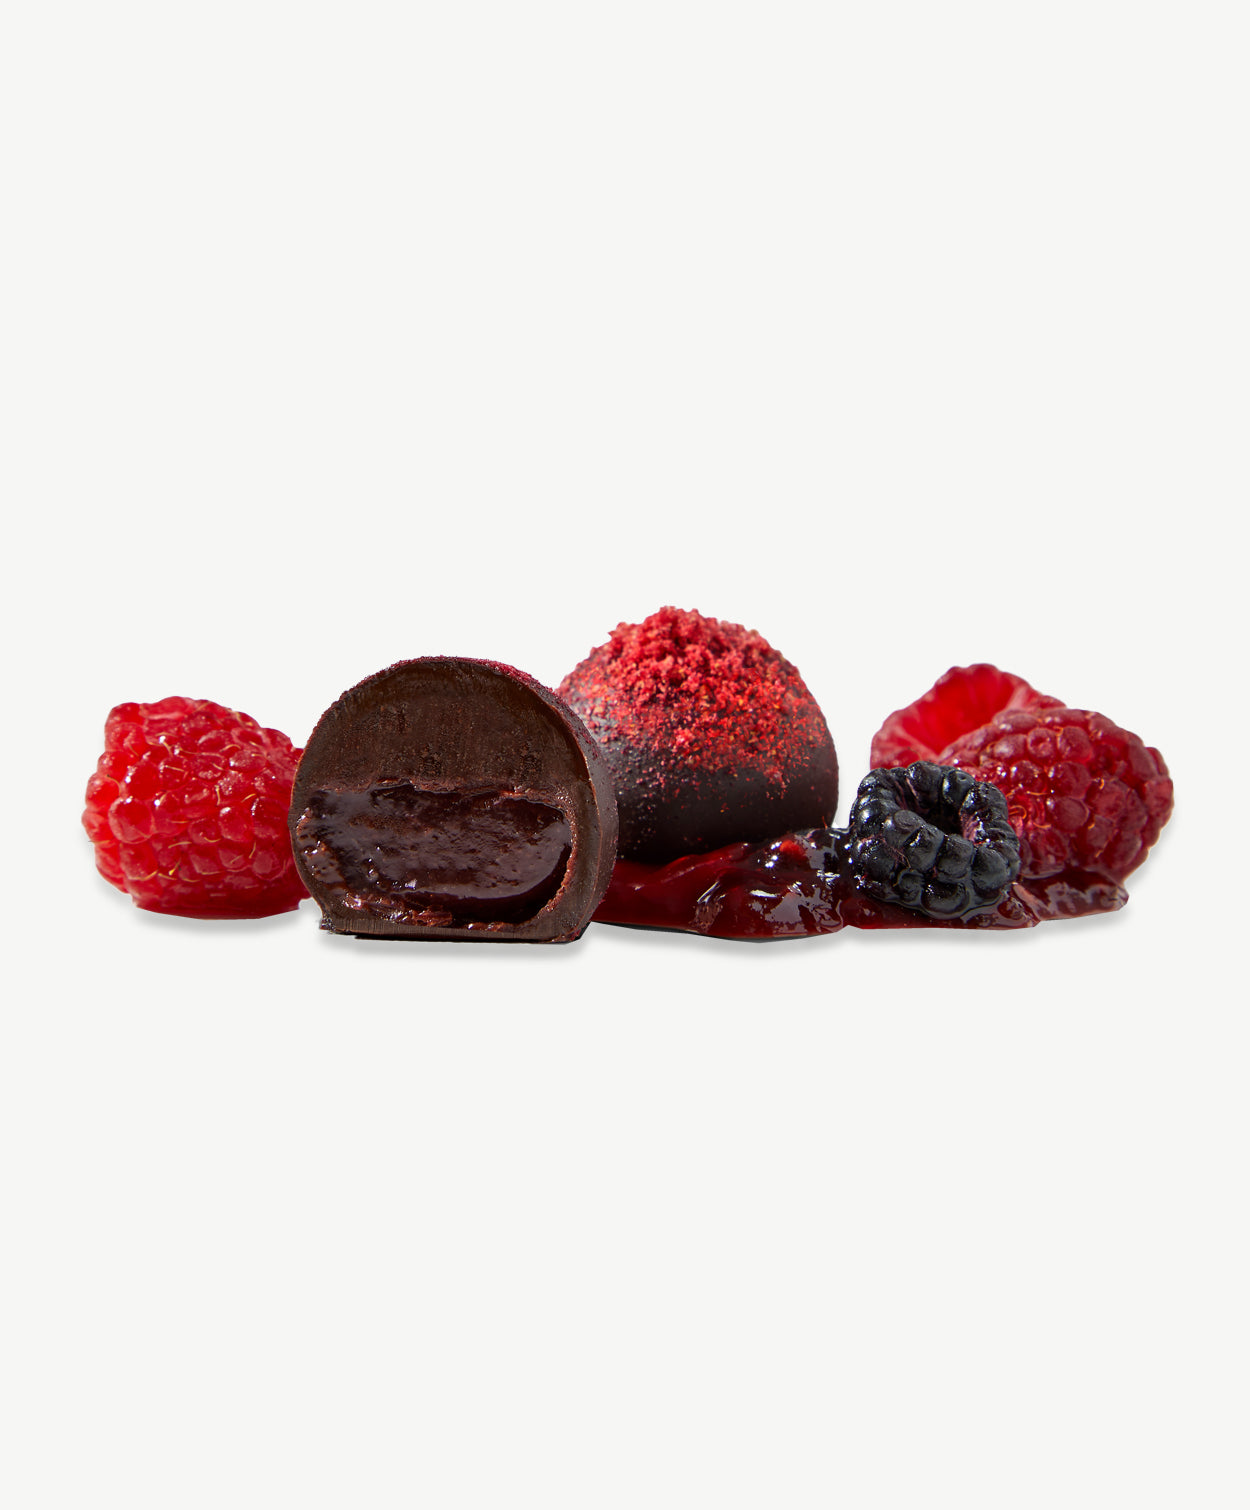 Two Vosges Raspberry Truffles sit beside several fresh black and red raspberries on a light grey background.